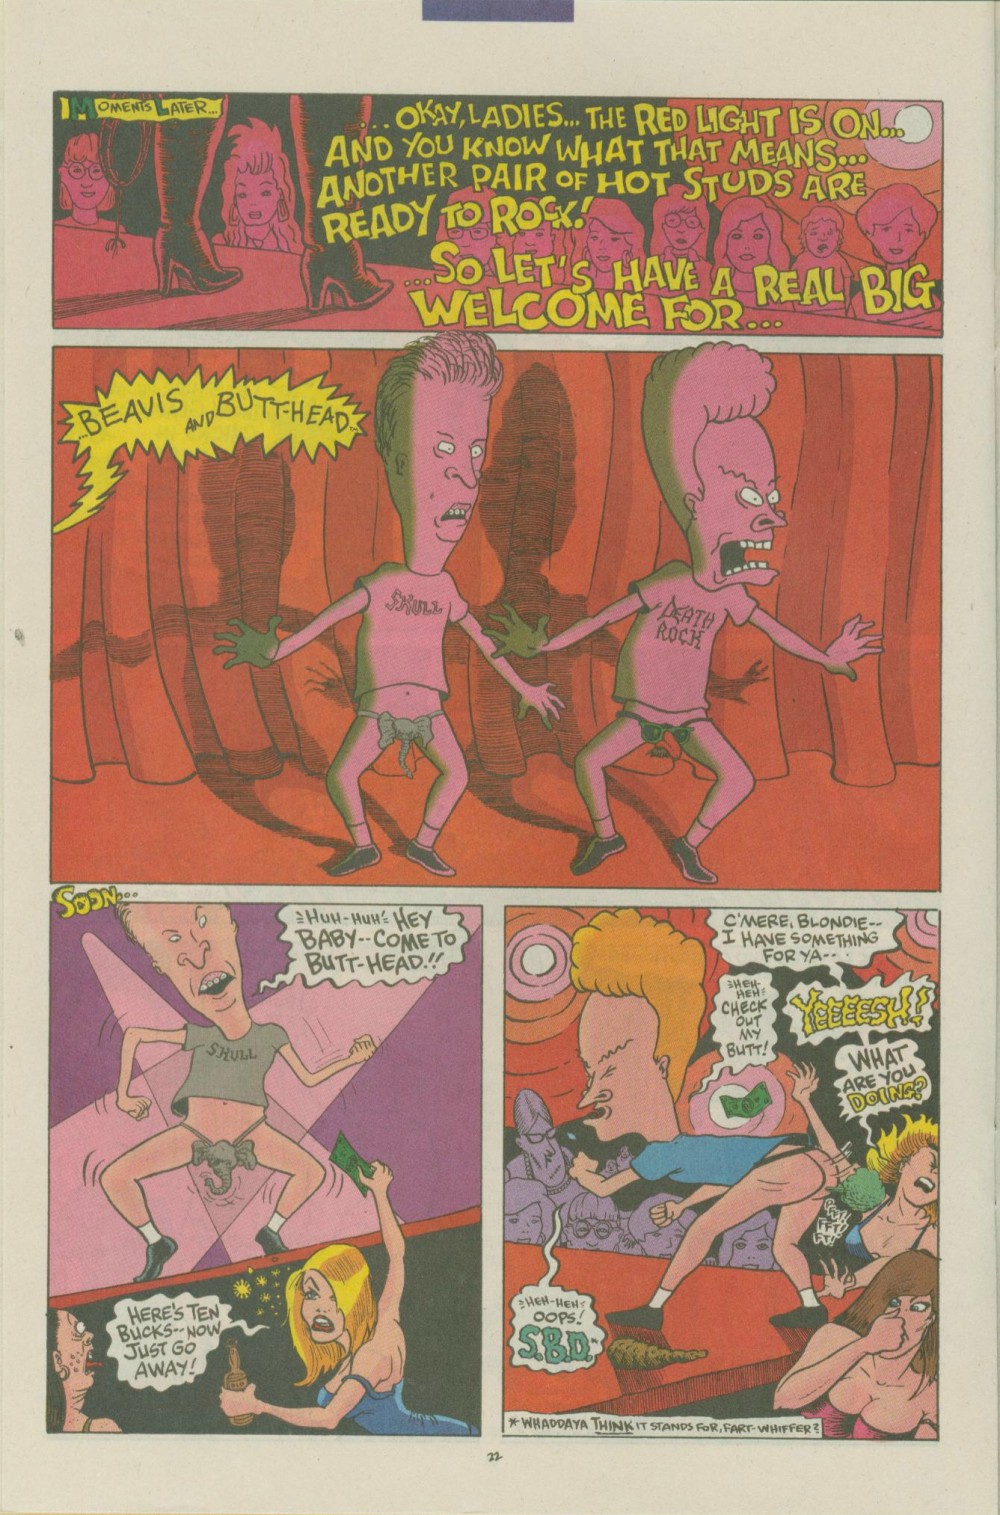 Beavis and Butt-Head 4 Page 21